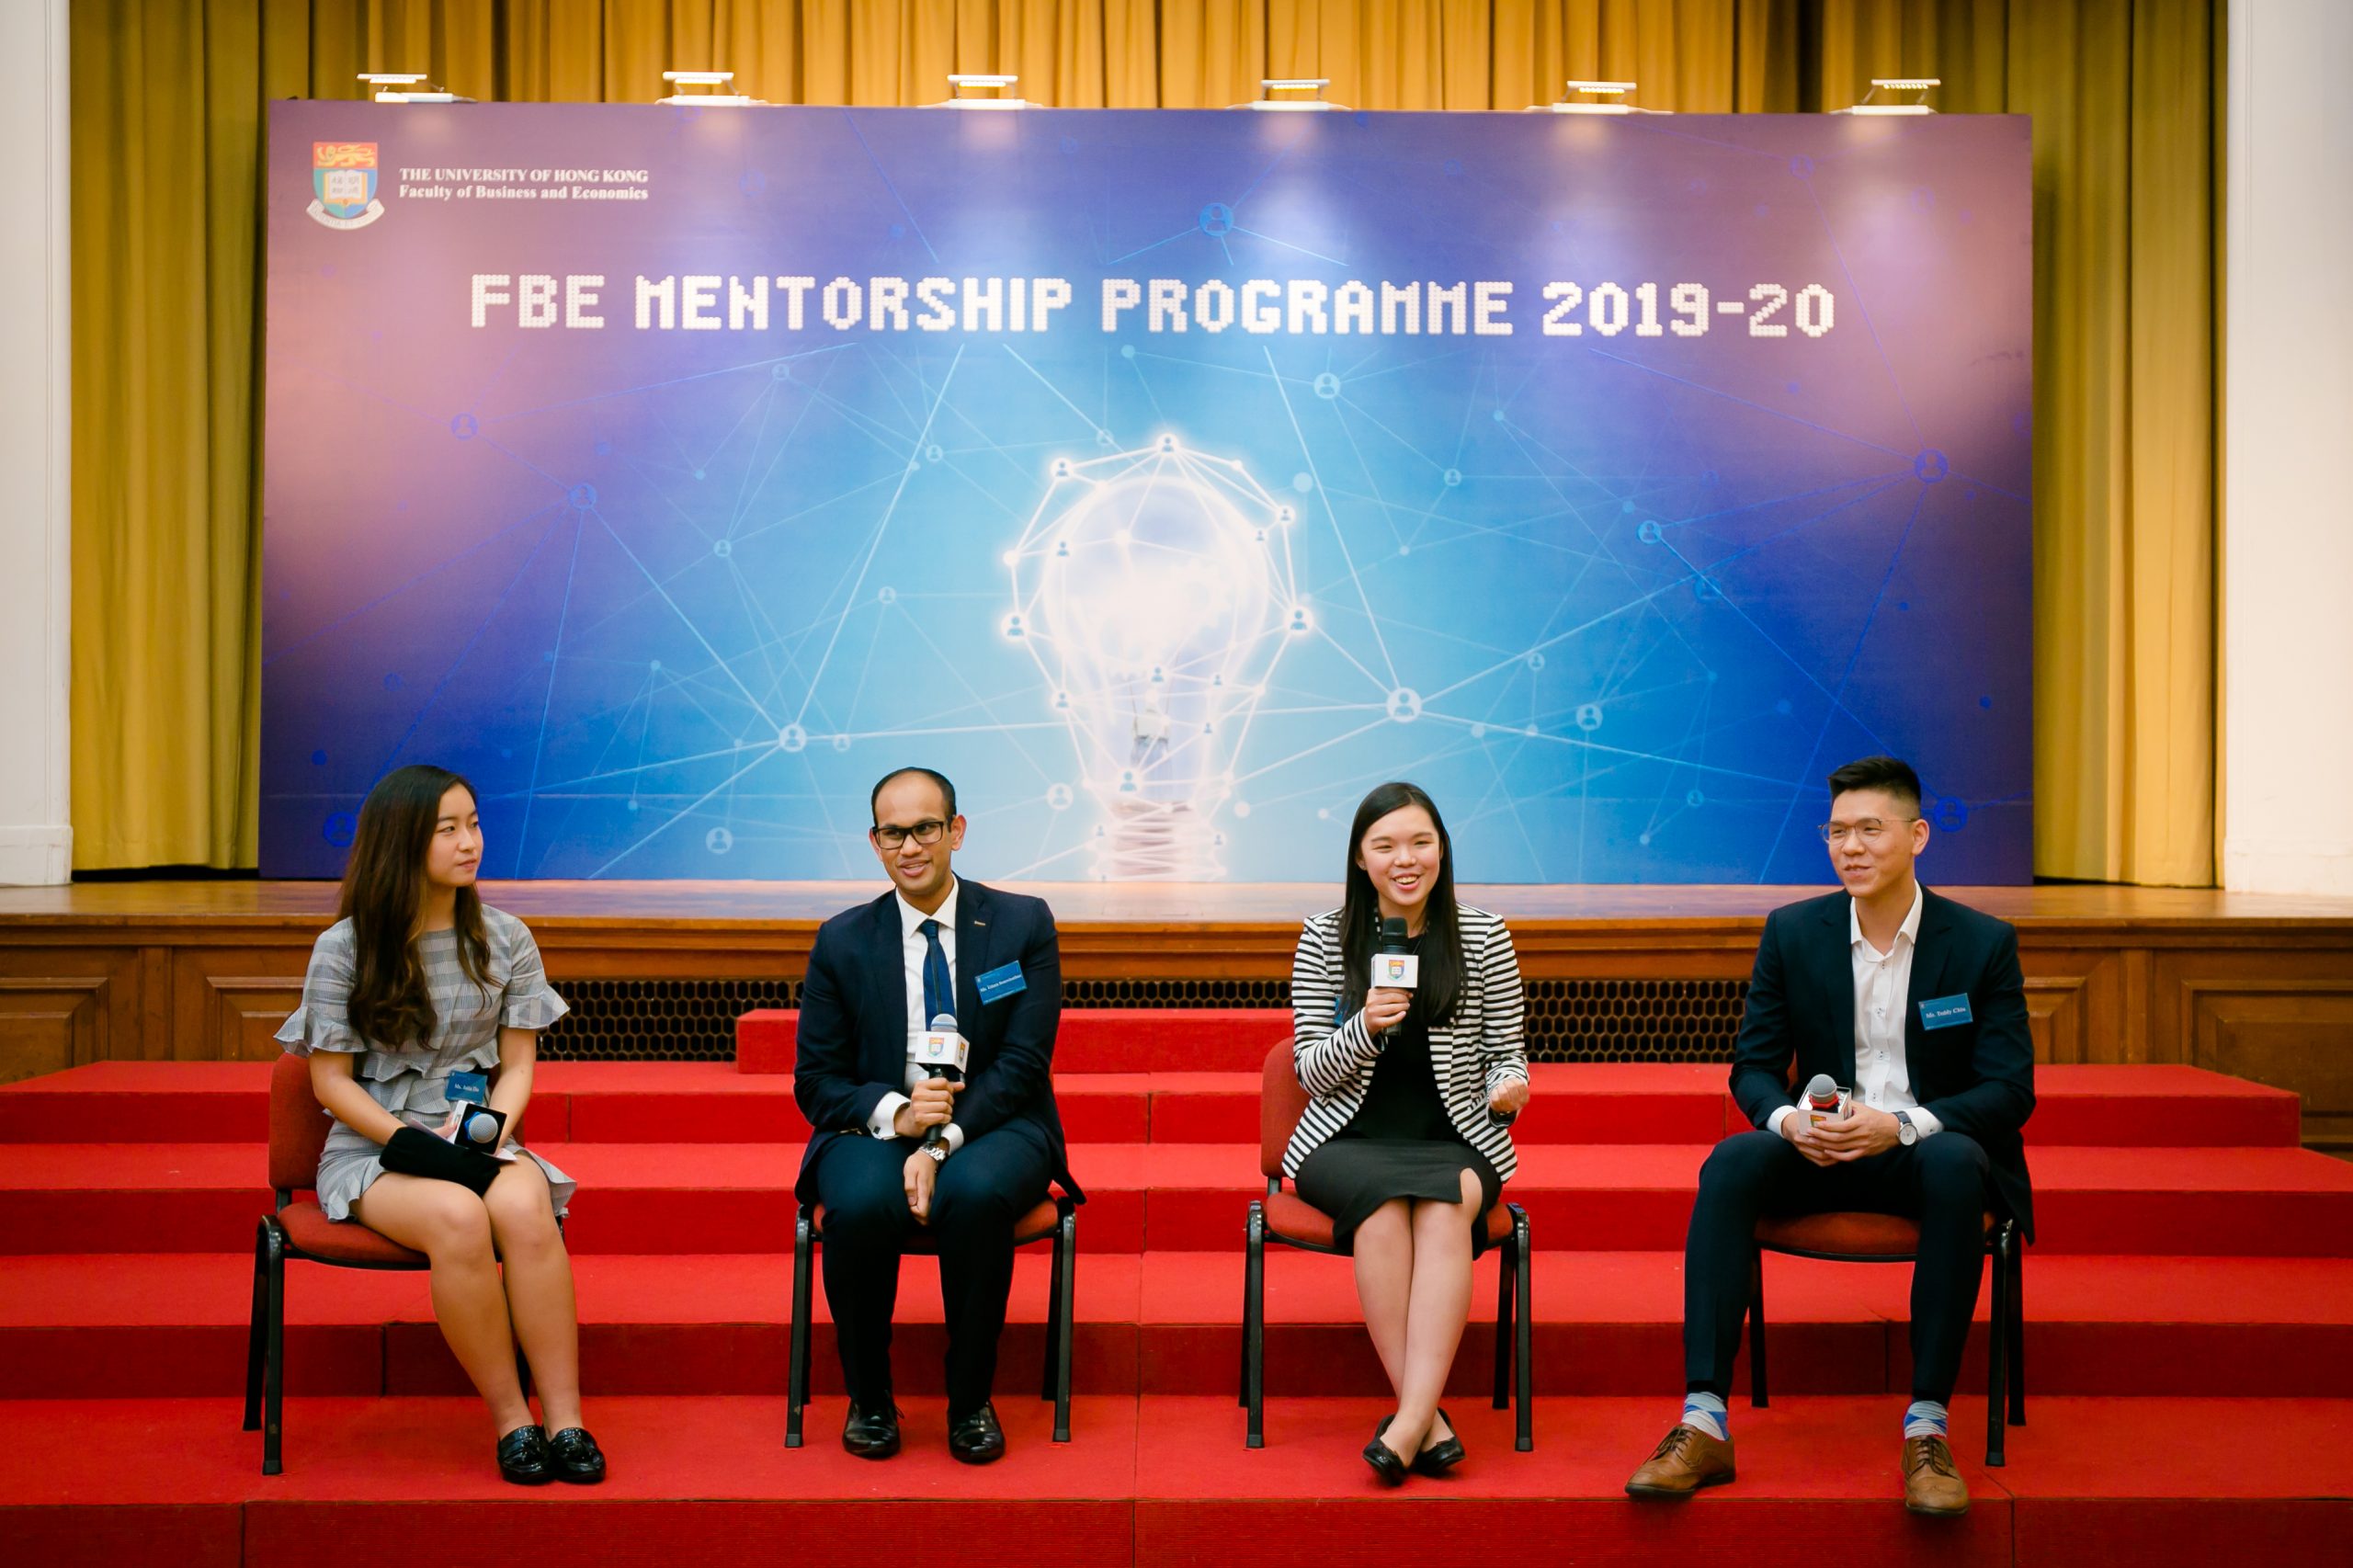 FBE Mentorship Programme 2019-20 empowers students